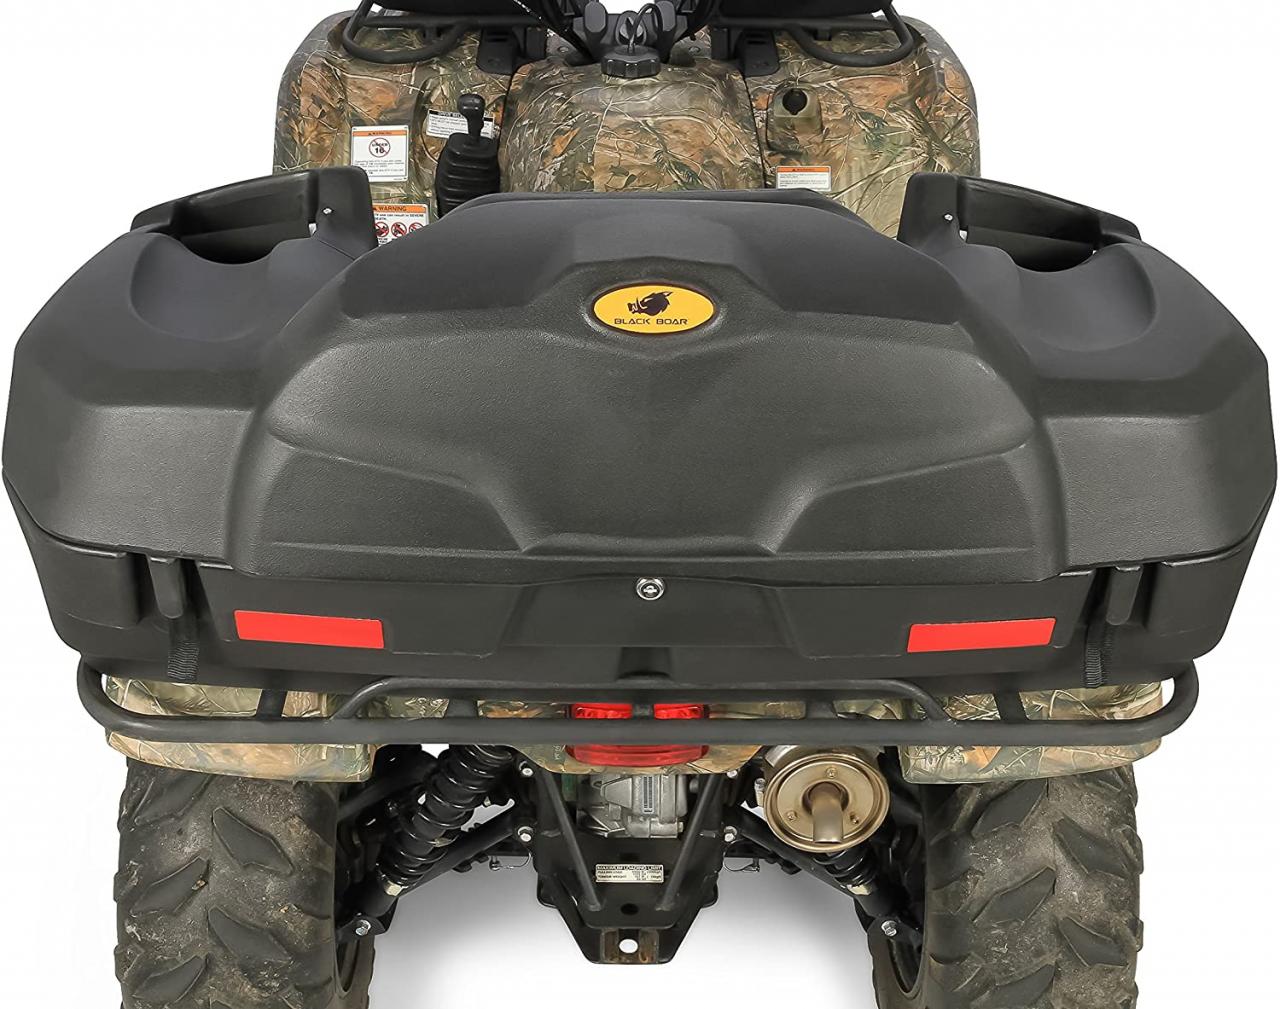 Buy Black Boar ATV/UTV, Manually Lift and Lower Implements with Handle or  Actuate Using a Drill and Socket (66013) Online in Poland. B06XKWNWR4